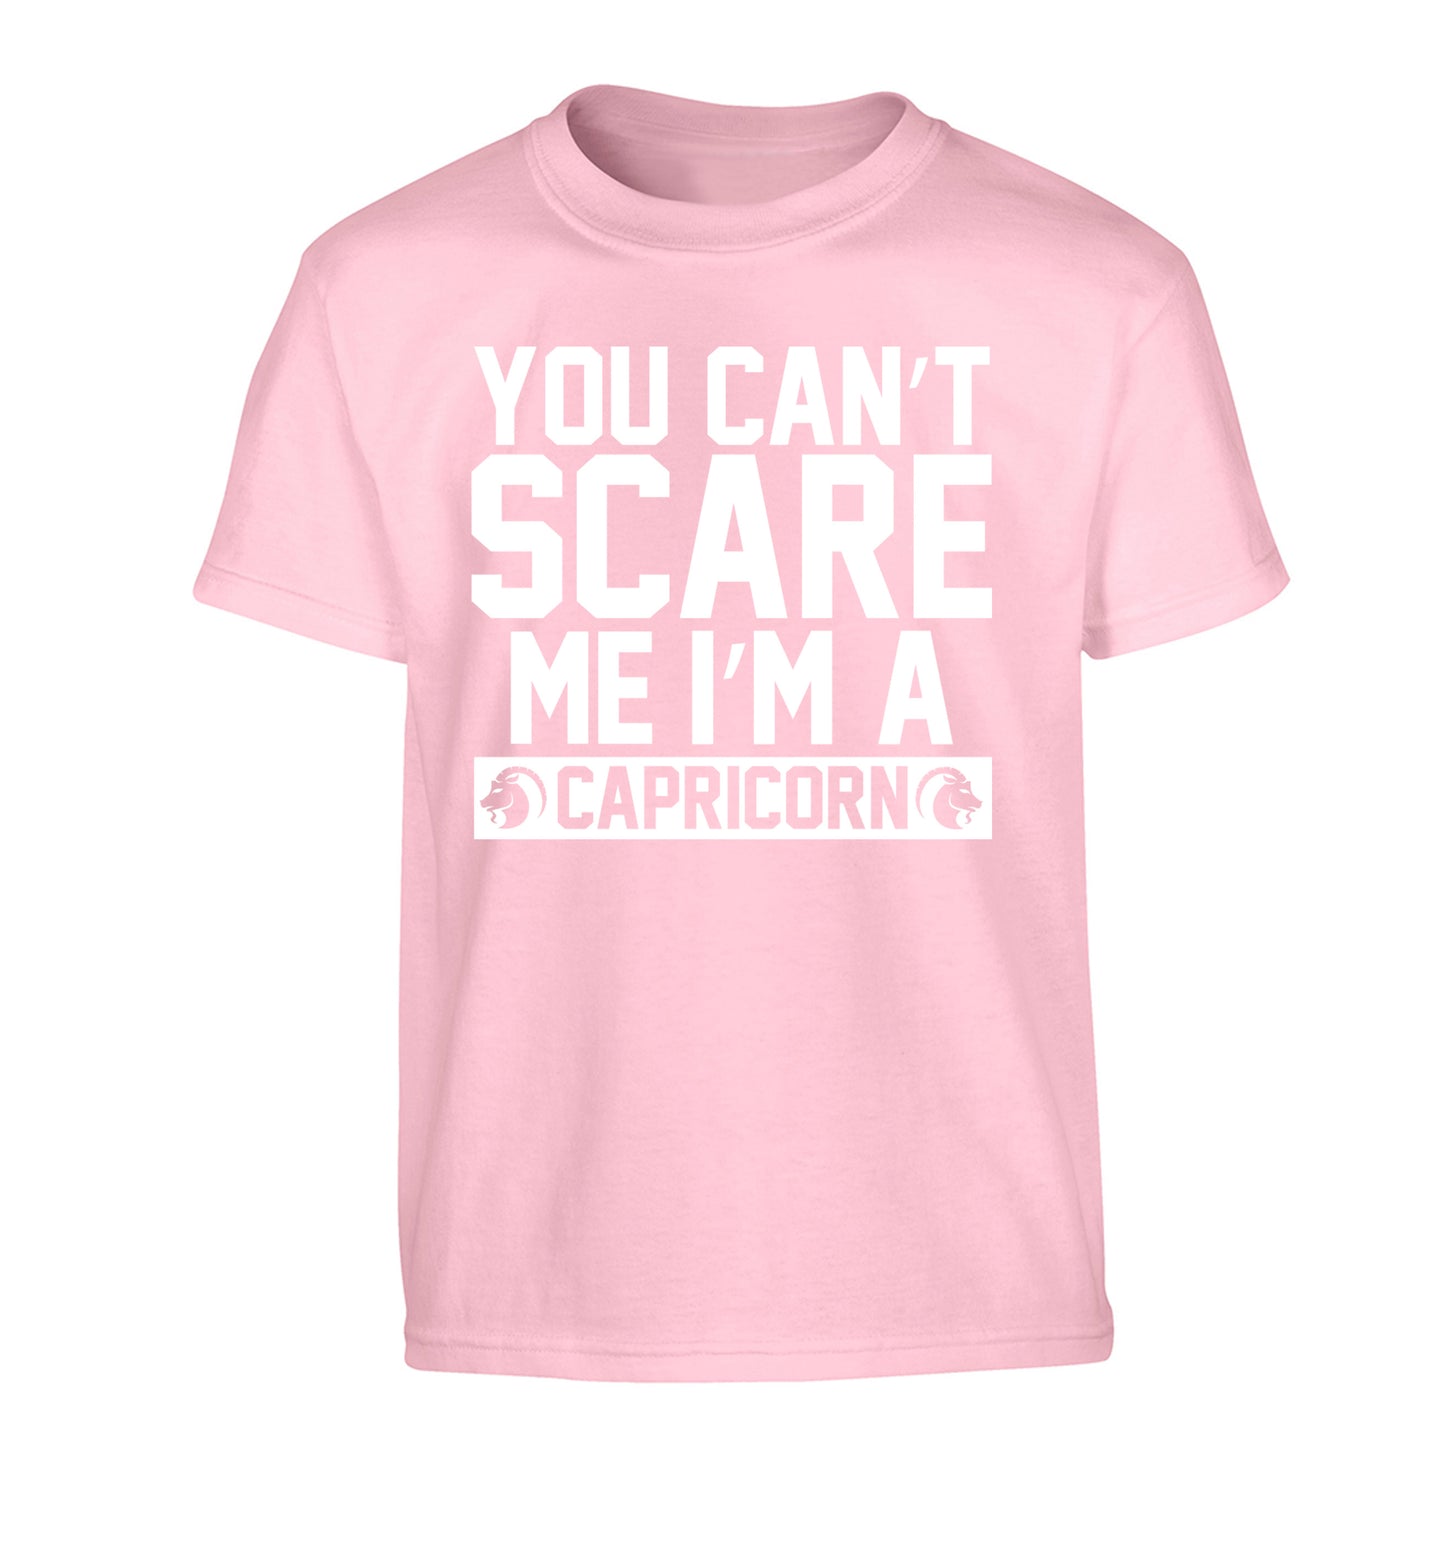 You can't scare me I'm a capricorn Children's light pink Tshirt 12-13 Years